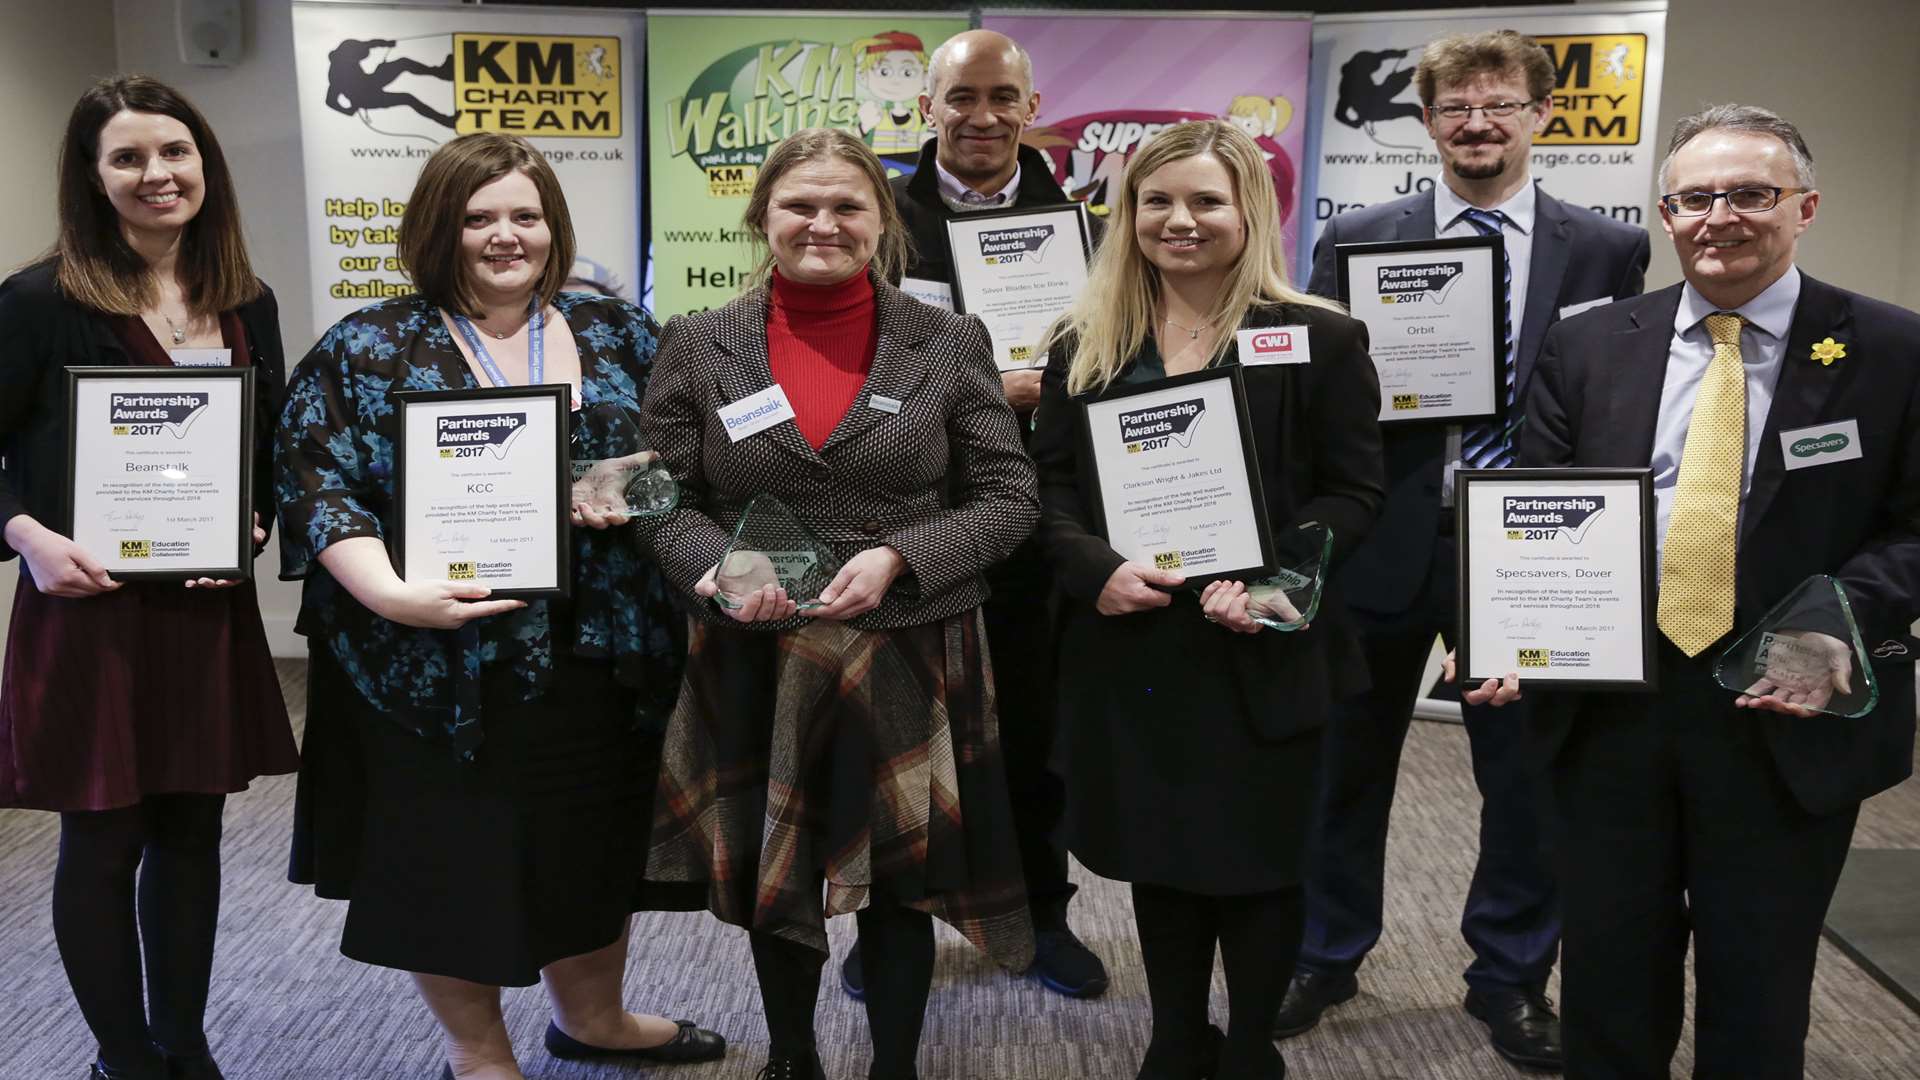 KM Charity Team present their Partnership Awards, thanking the many sponsors of their literacy schemes.